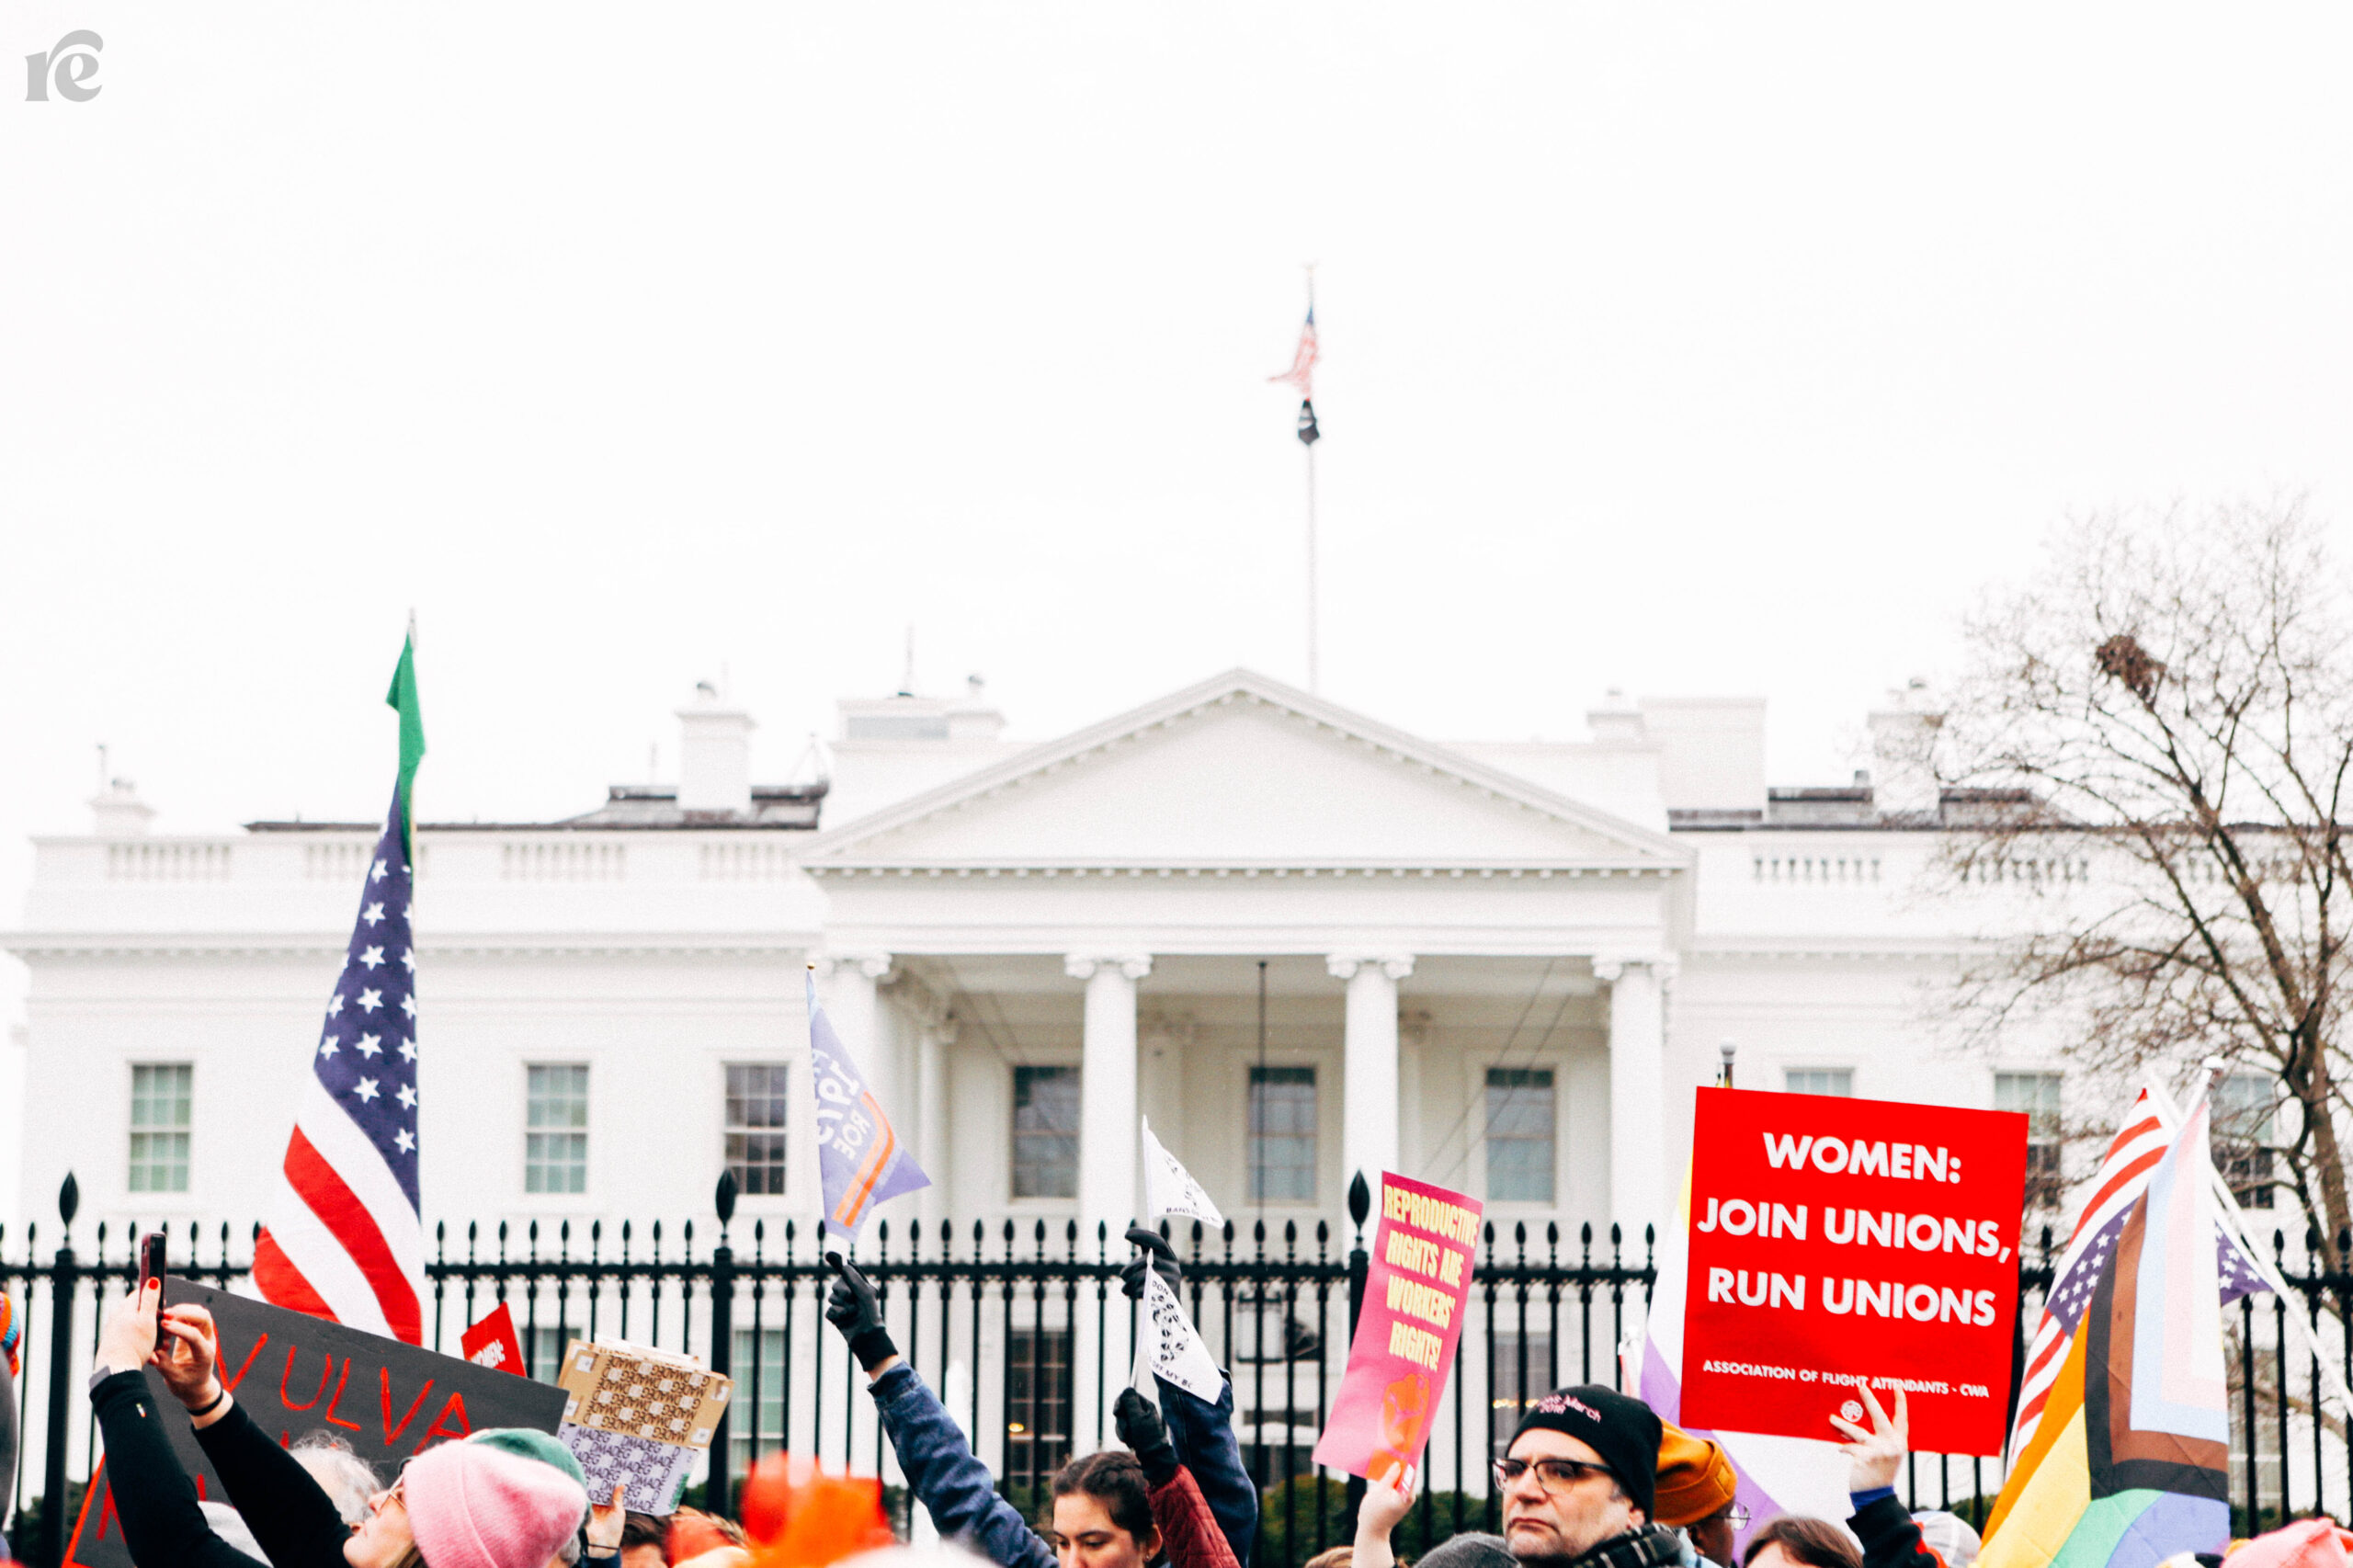 Pro-union protest in front of the White House gates